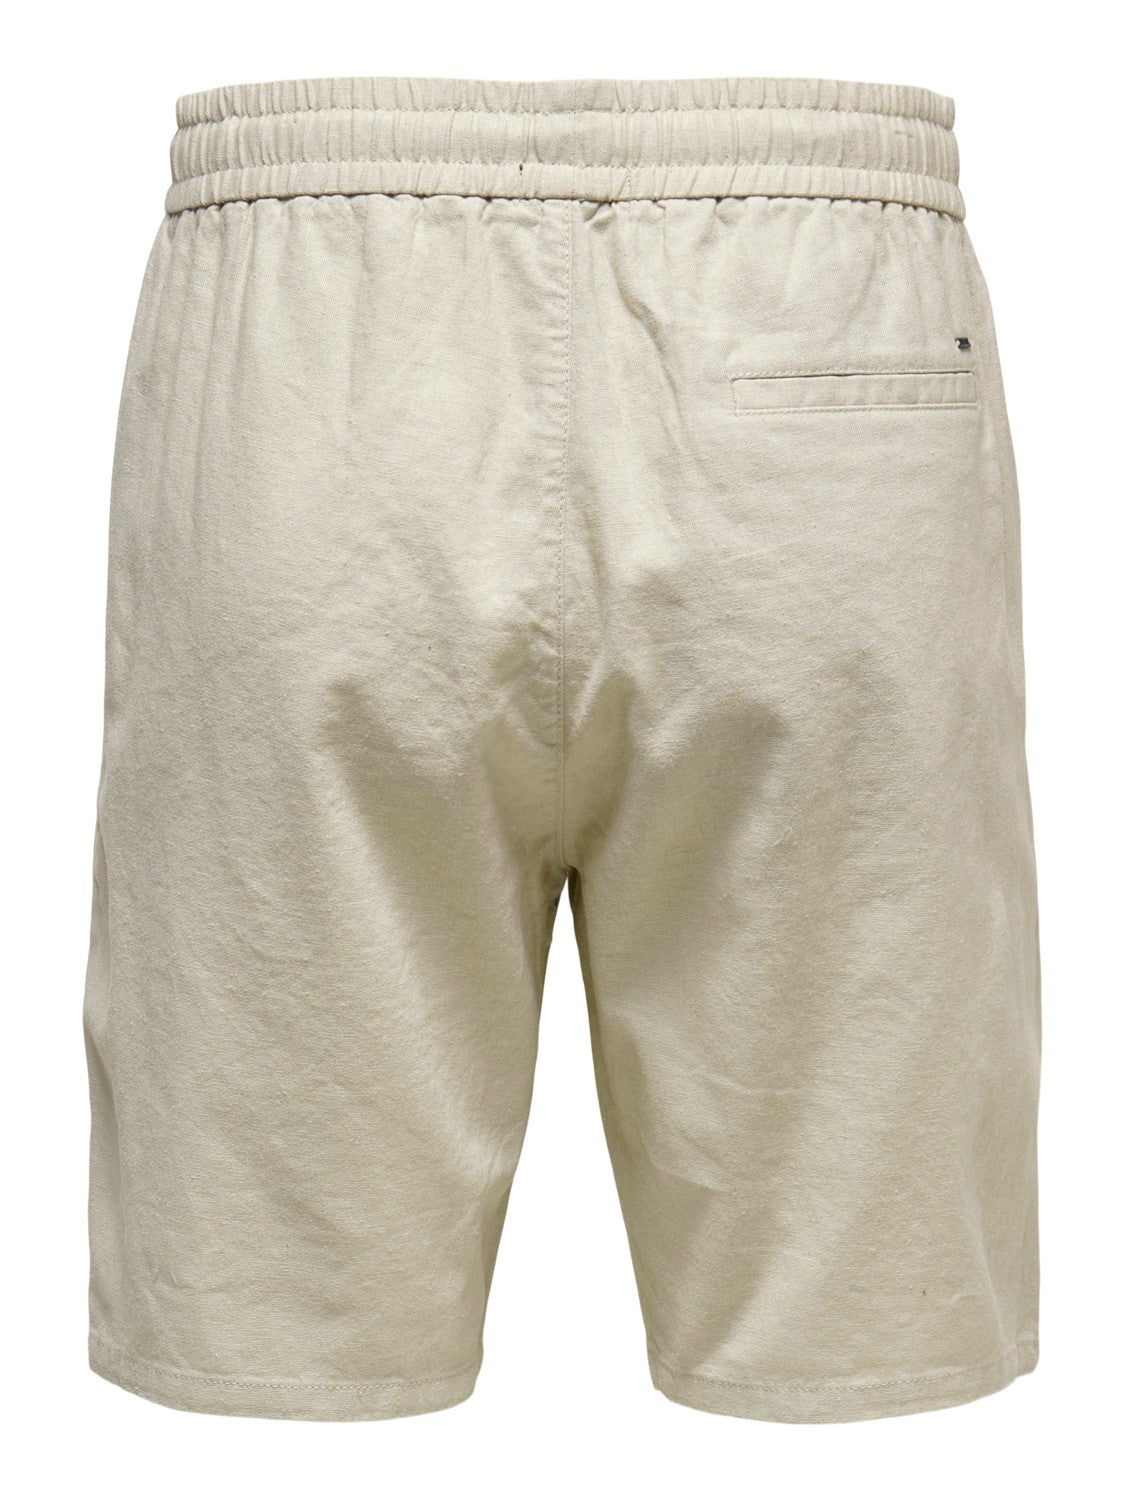 ONLY & SONS PANTALONCINI IN LINO COTONE - Silver Lining